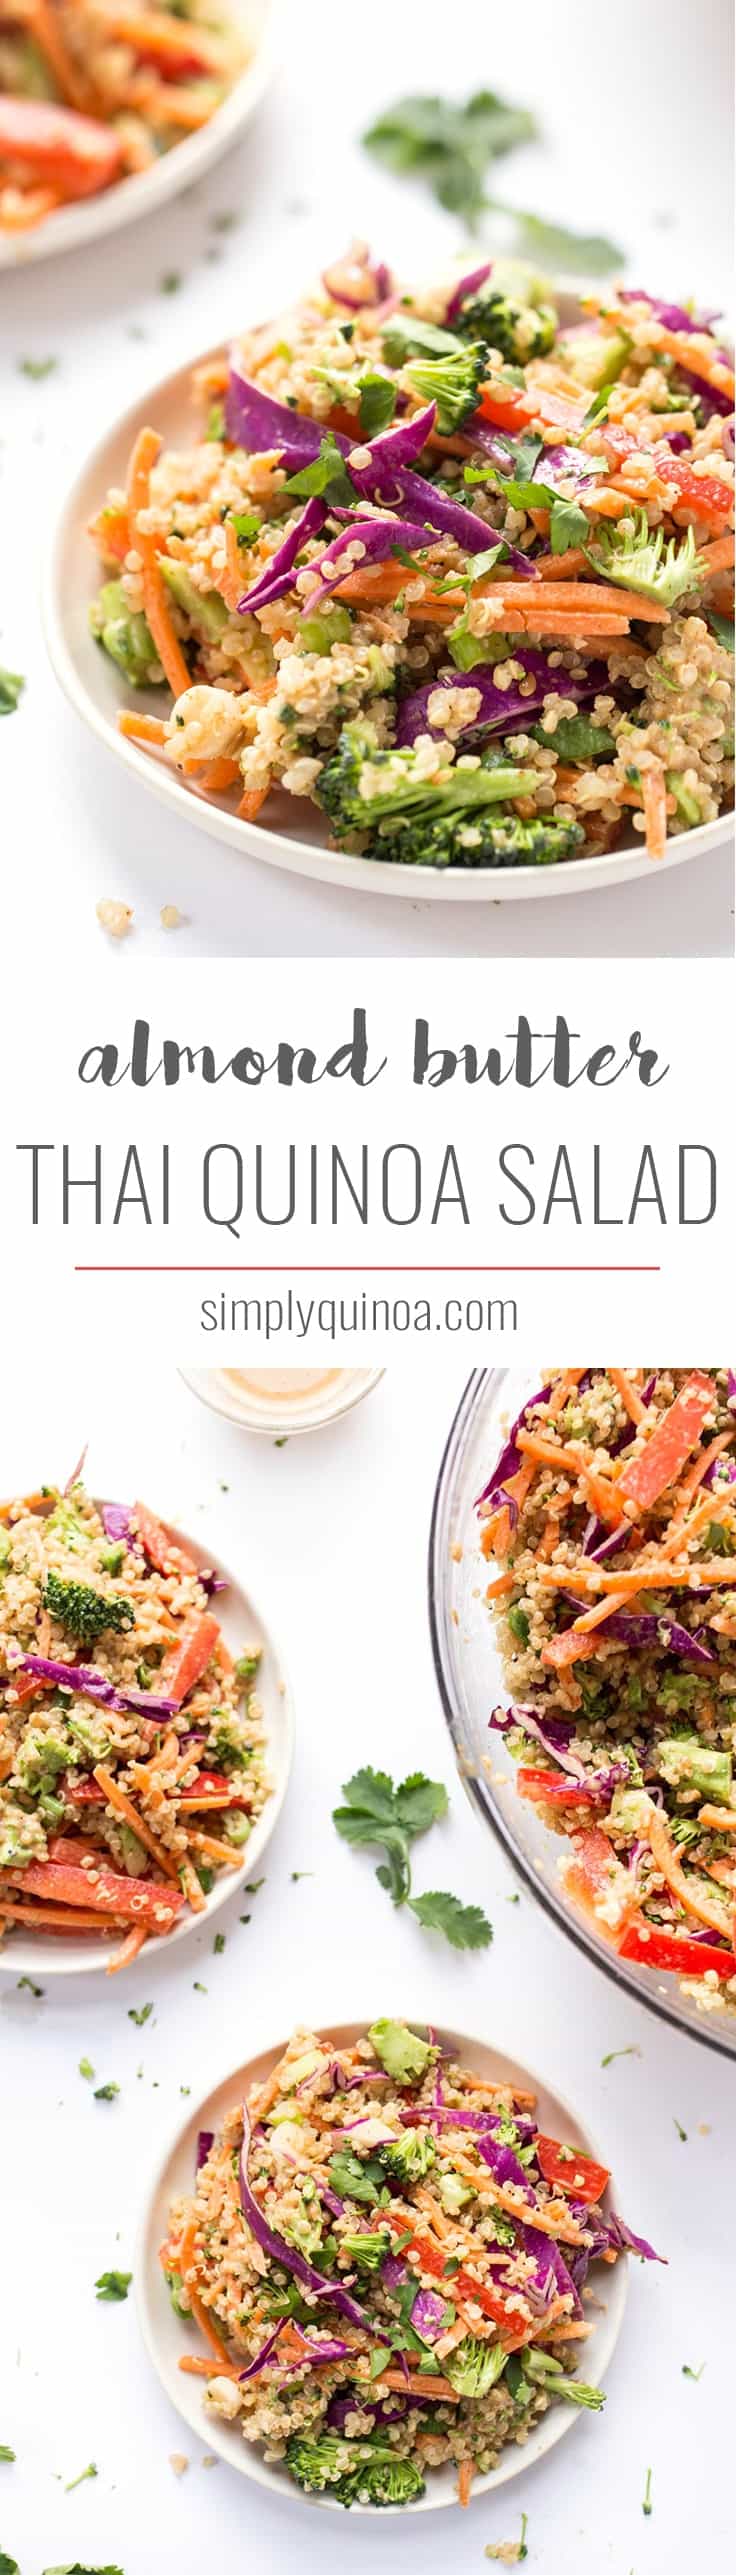 This simple THAI QUINOA SALAD is peppered with a rainbow of veggies and tossed in a creamy almond butter sauce! Tastes like pad thai, but in salad form!